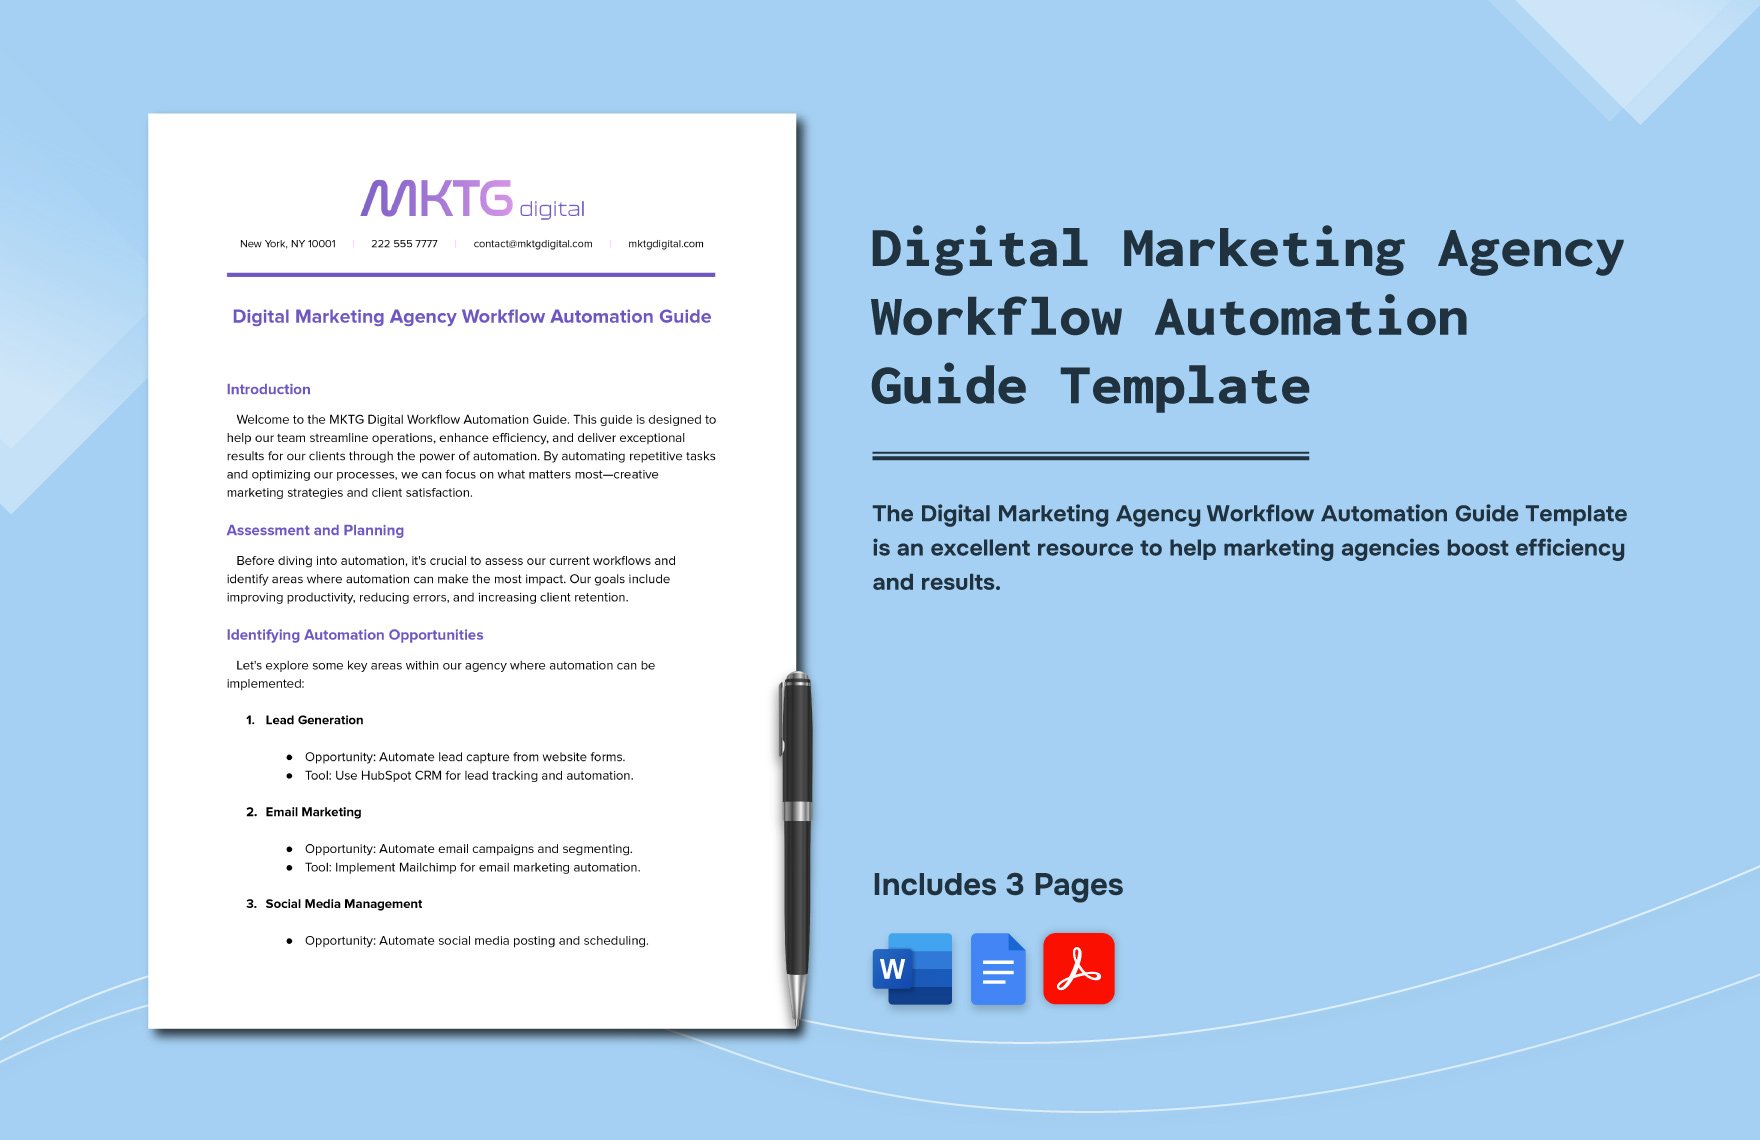 Digital Marketing Agency Workflow Automation Guide Template in Word, Google Docs, PDF